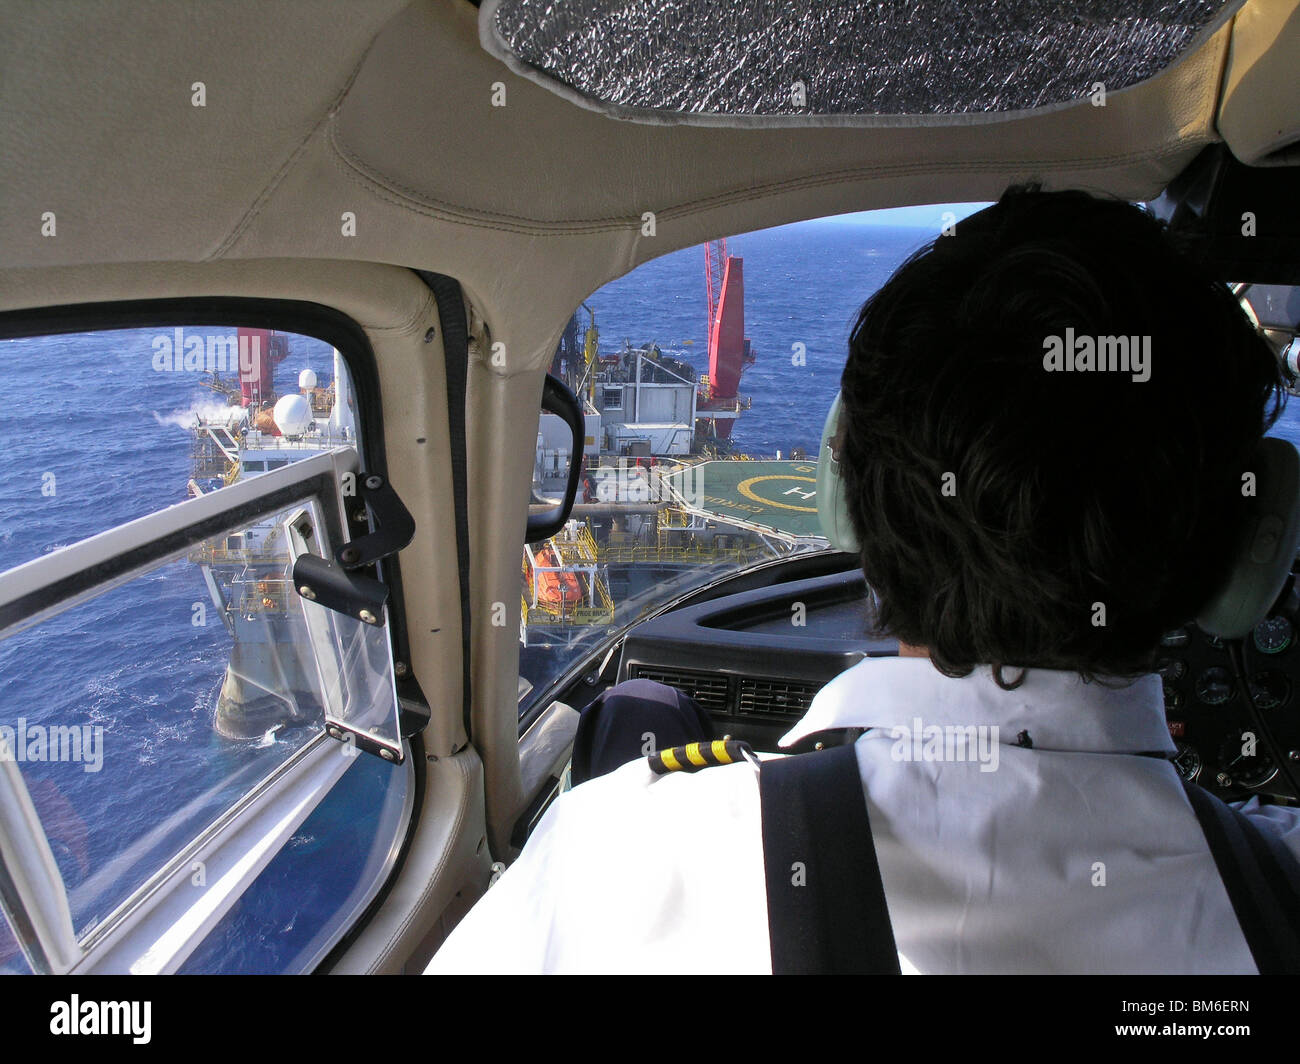 Helicopter landing at petroleum platform, Bacia de Campos, Brazil. View from inside helicopter. Stock Photo